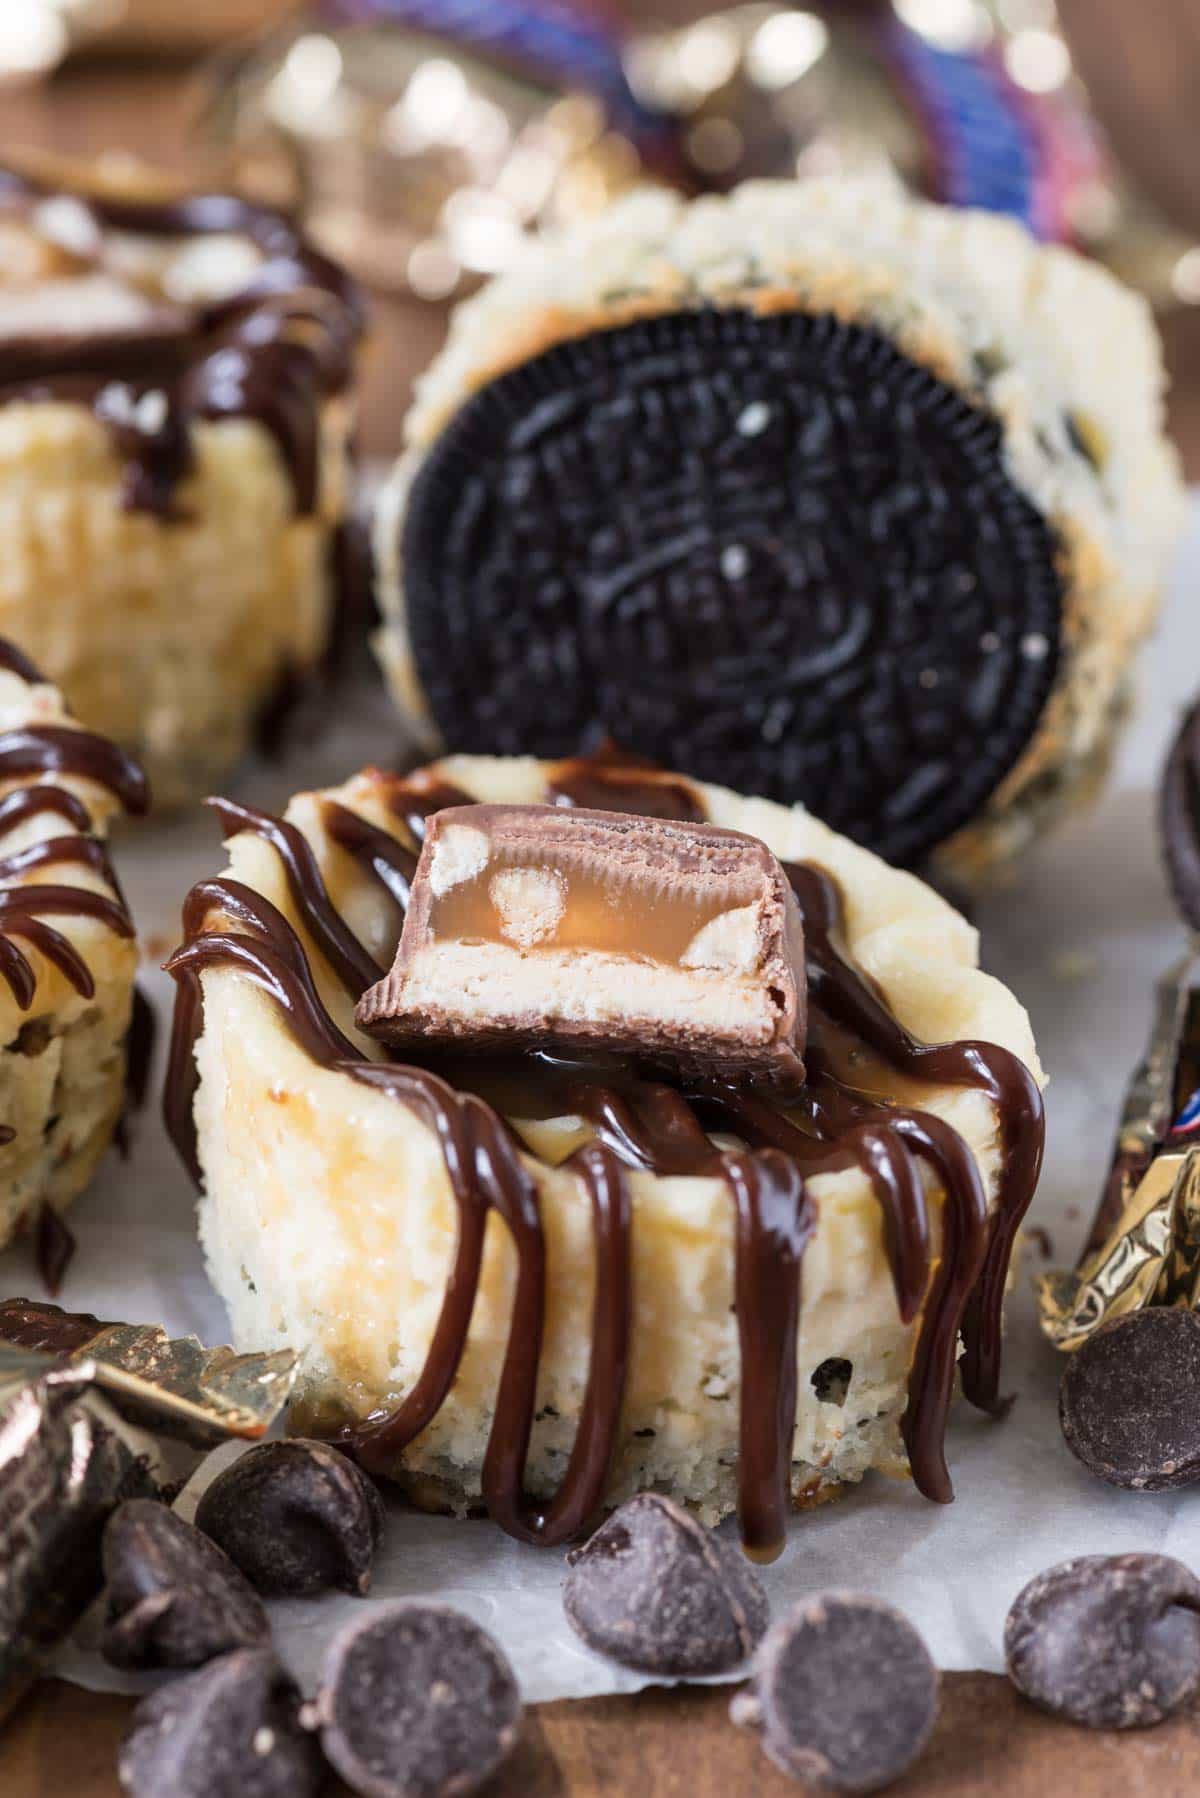 Mini Snickers Cheesecakes - these easy cheesecakes are made in a muffin cup with an Oreo crust and a surprise Snickers bite filling!